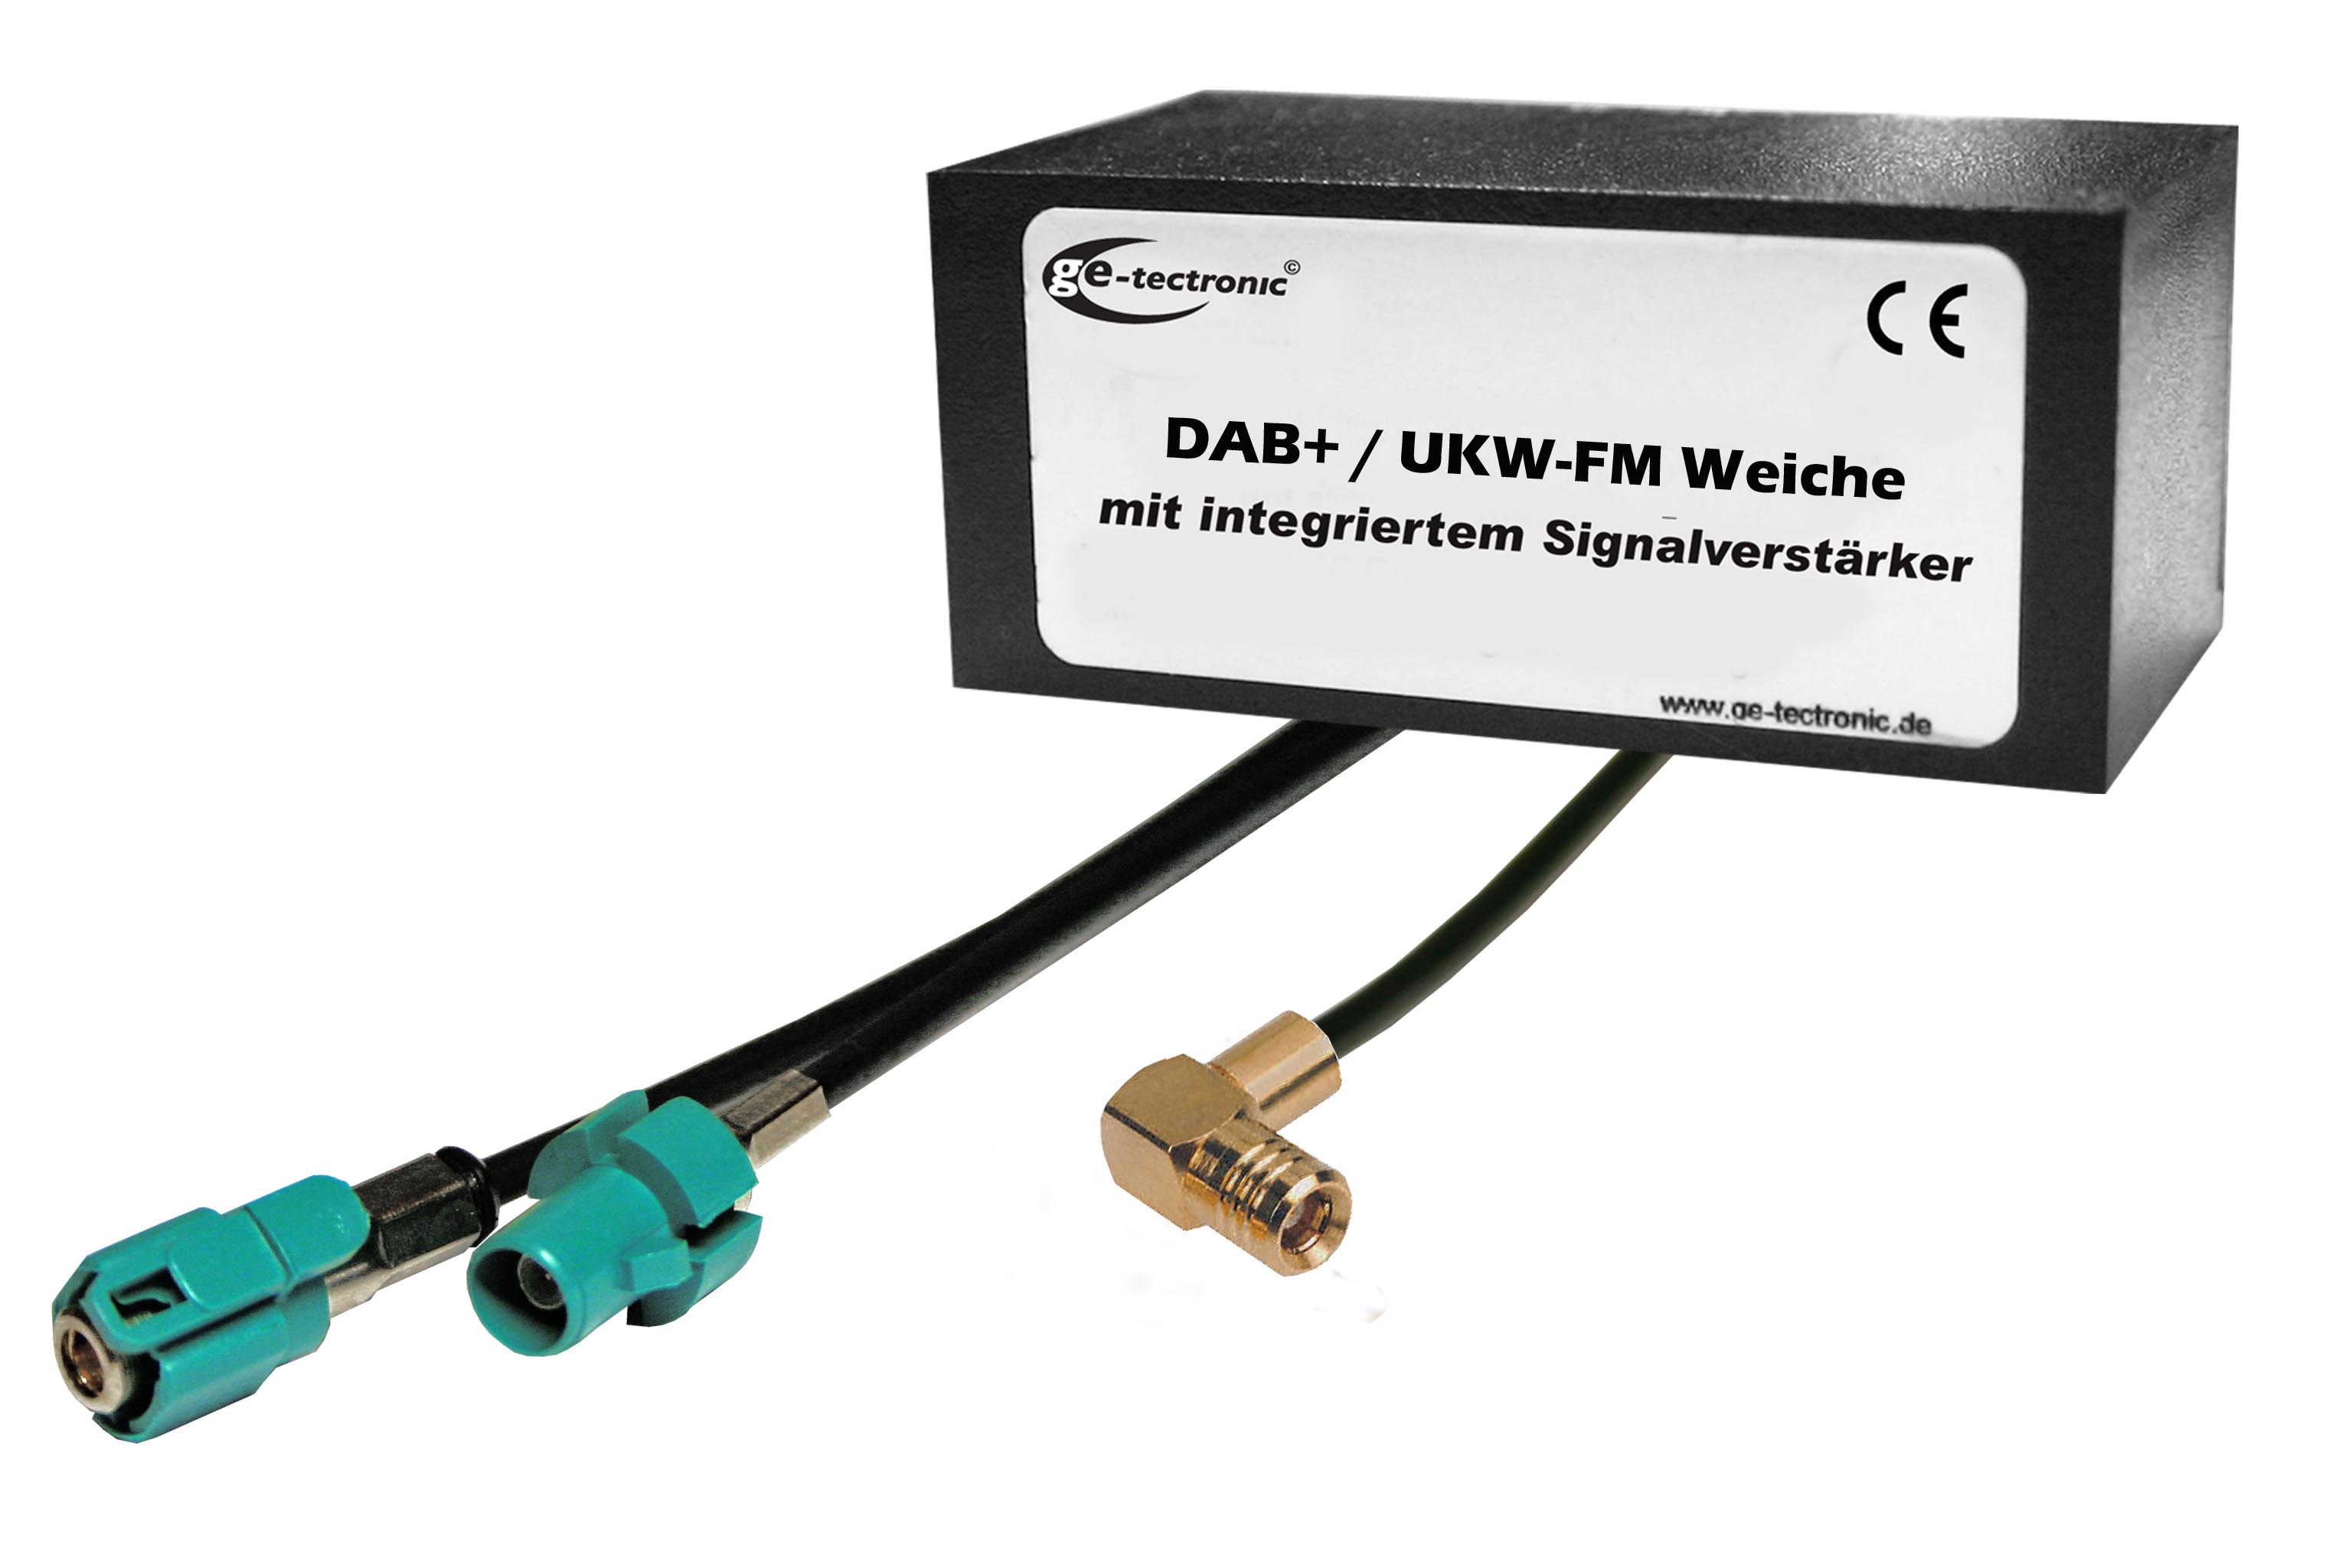 DAB/DAB+/UKW Antennenweiche, ge-tectronic, Story - lifePR